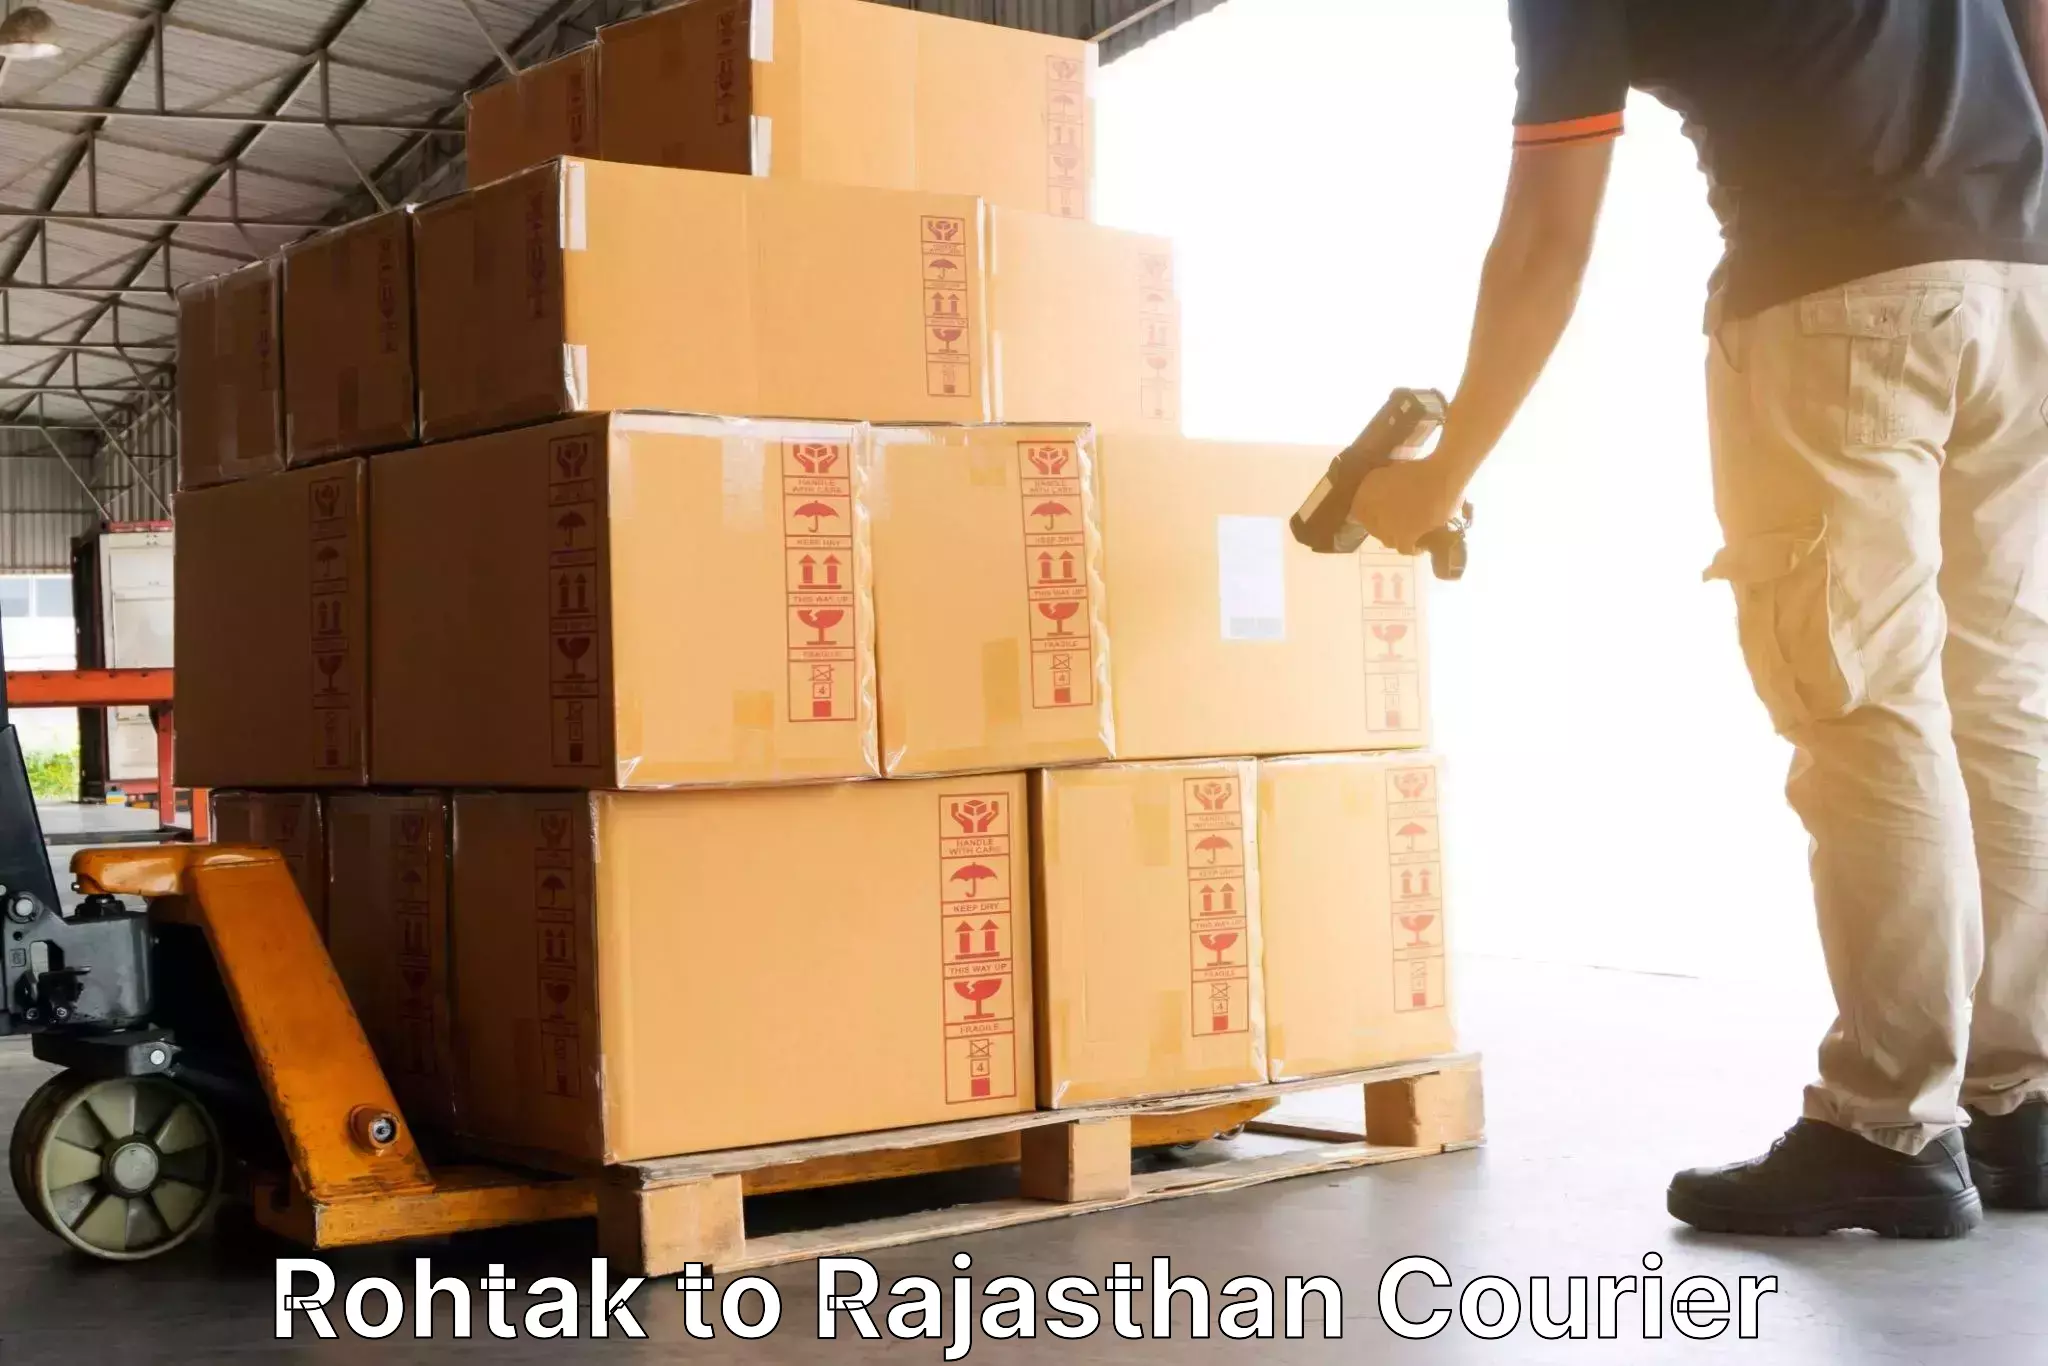 Supply chain delivery Rohtak to Bhiwadi